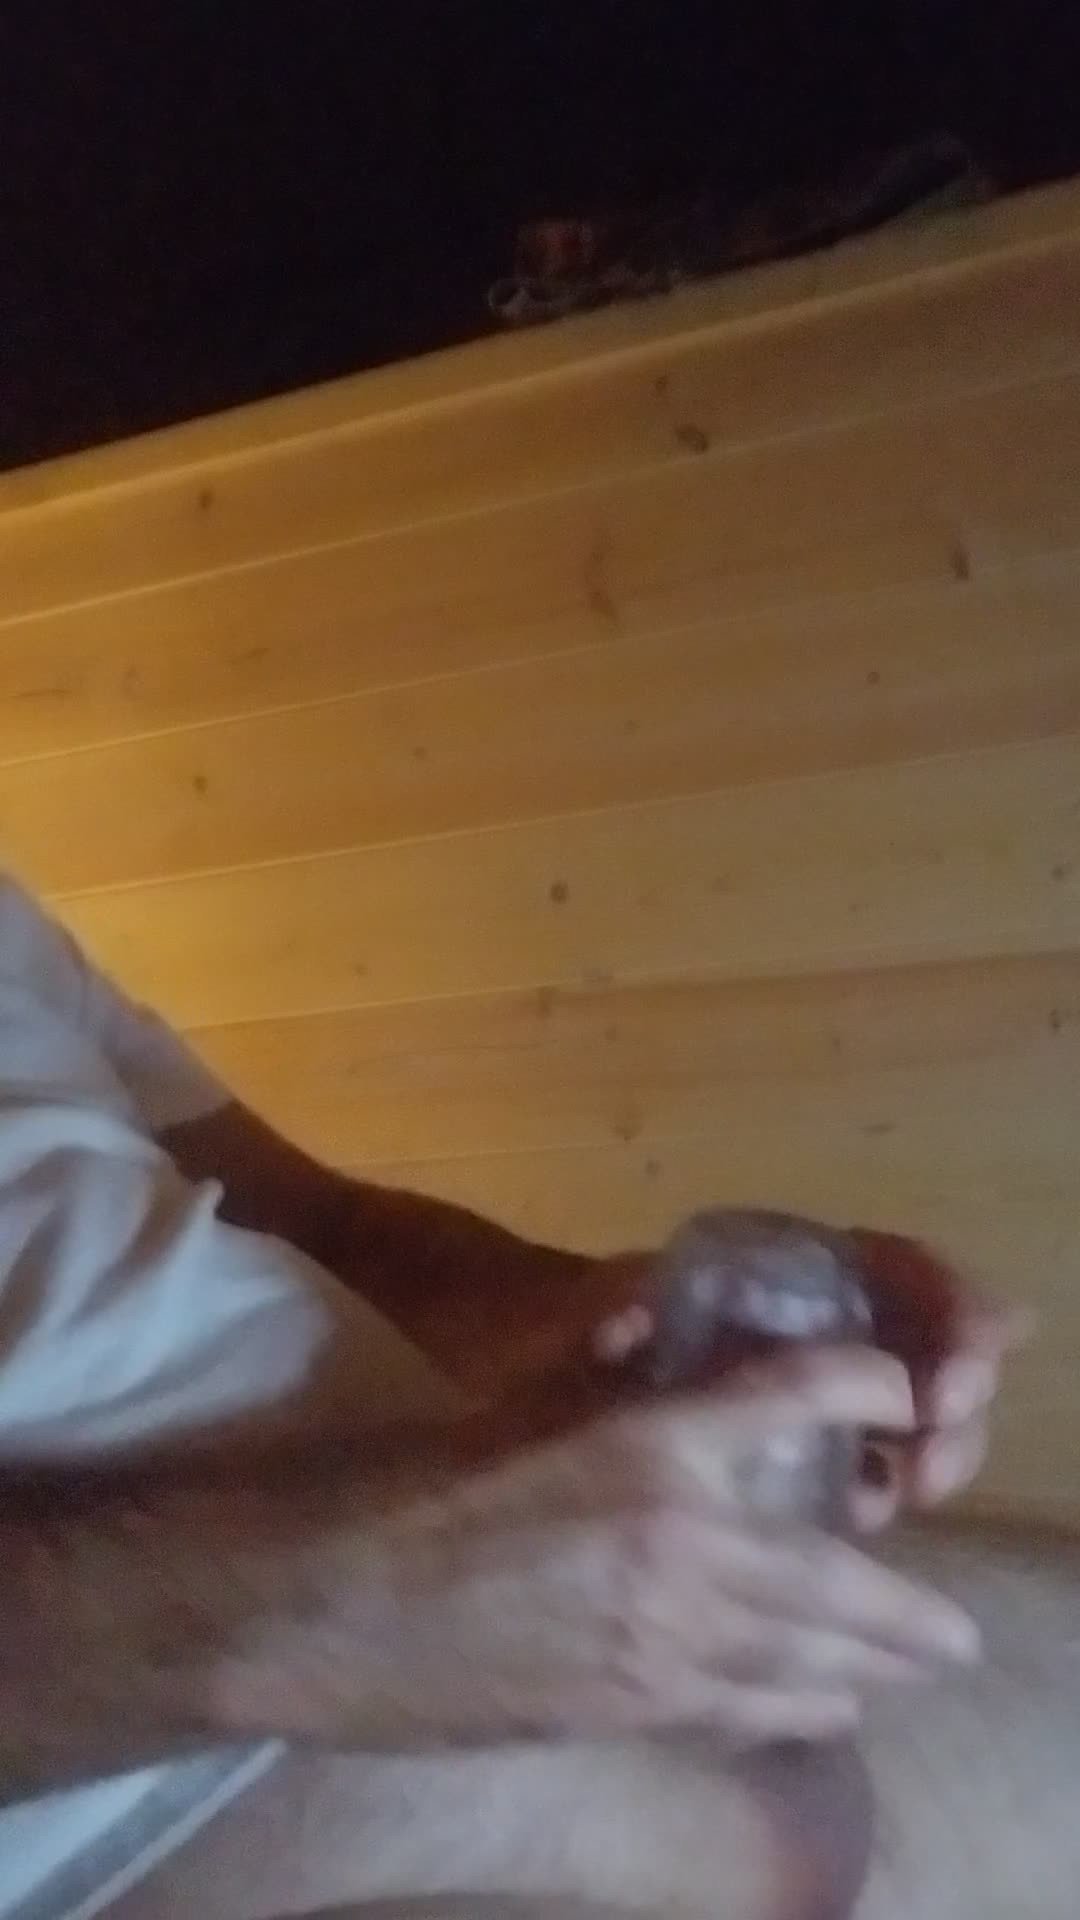 Playing with Sleeve toy then cumming